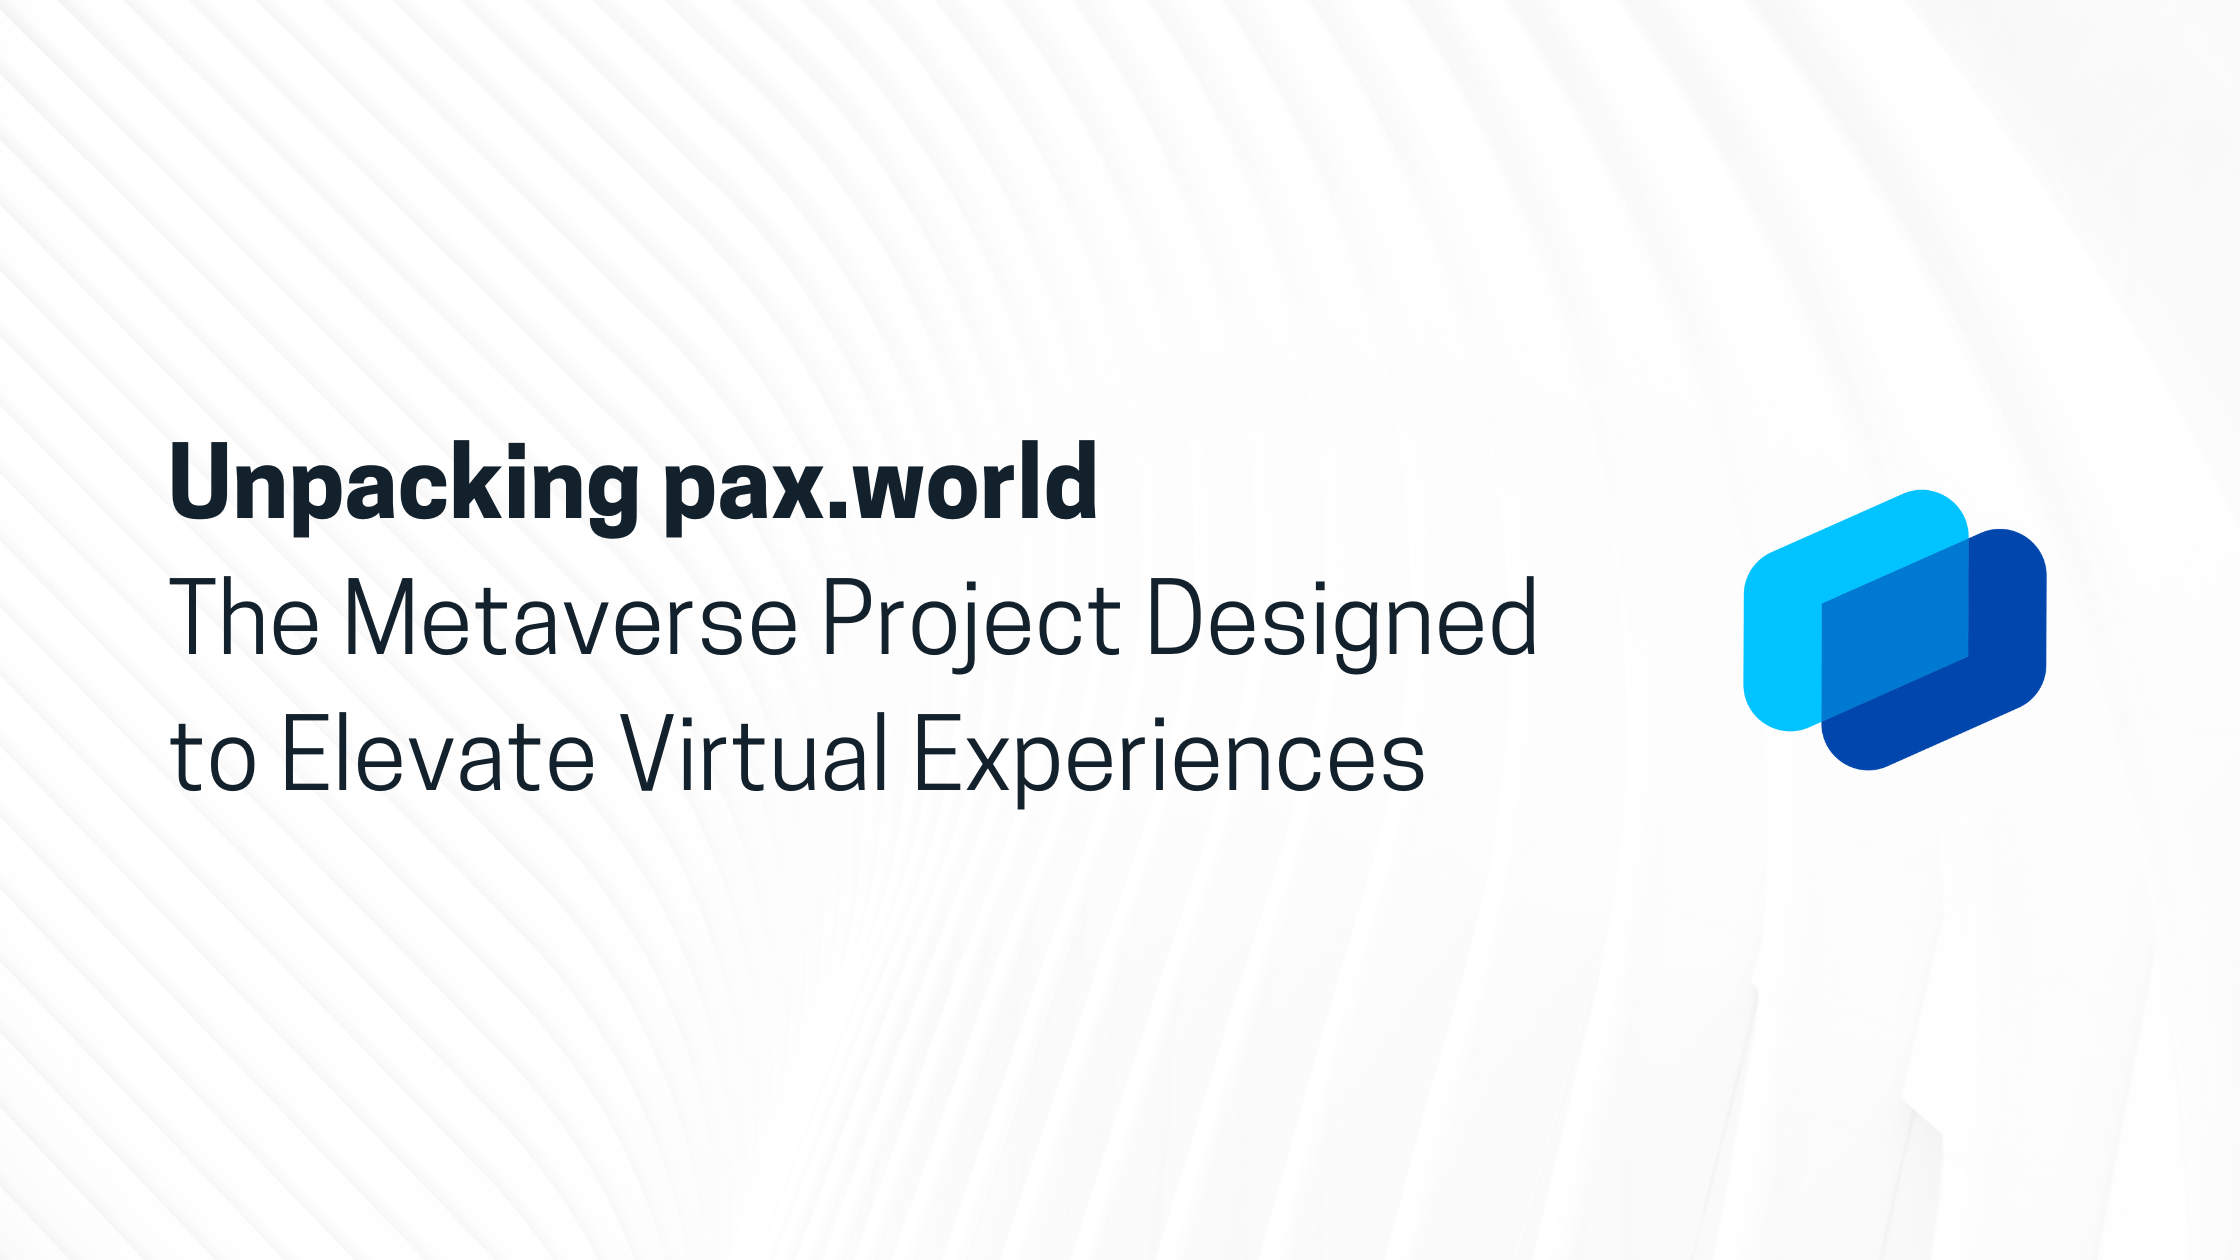 Unpacking pax.world: The Metaverse Project Designed to Elevate Virtual Experiences 2